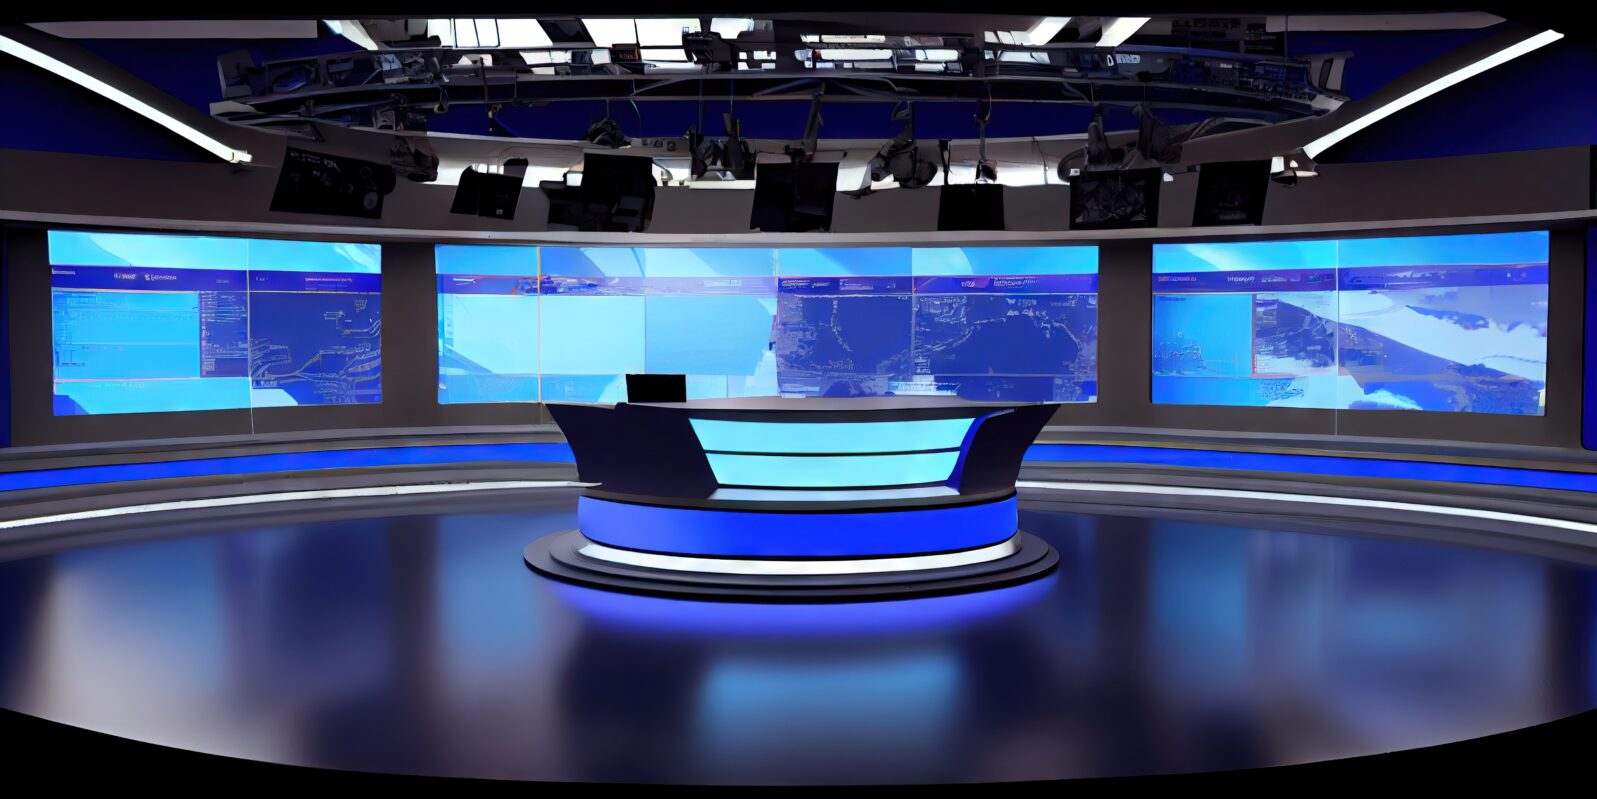 TV News studio - recording and broadcasting media in a modern set design with blue background for journalists. Generative AI